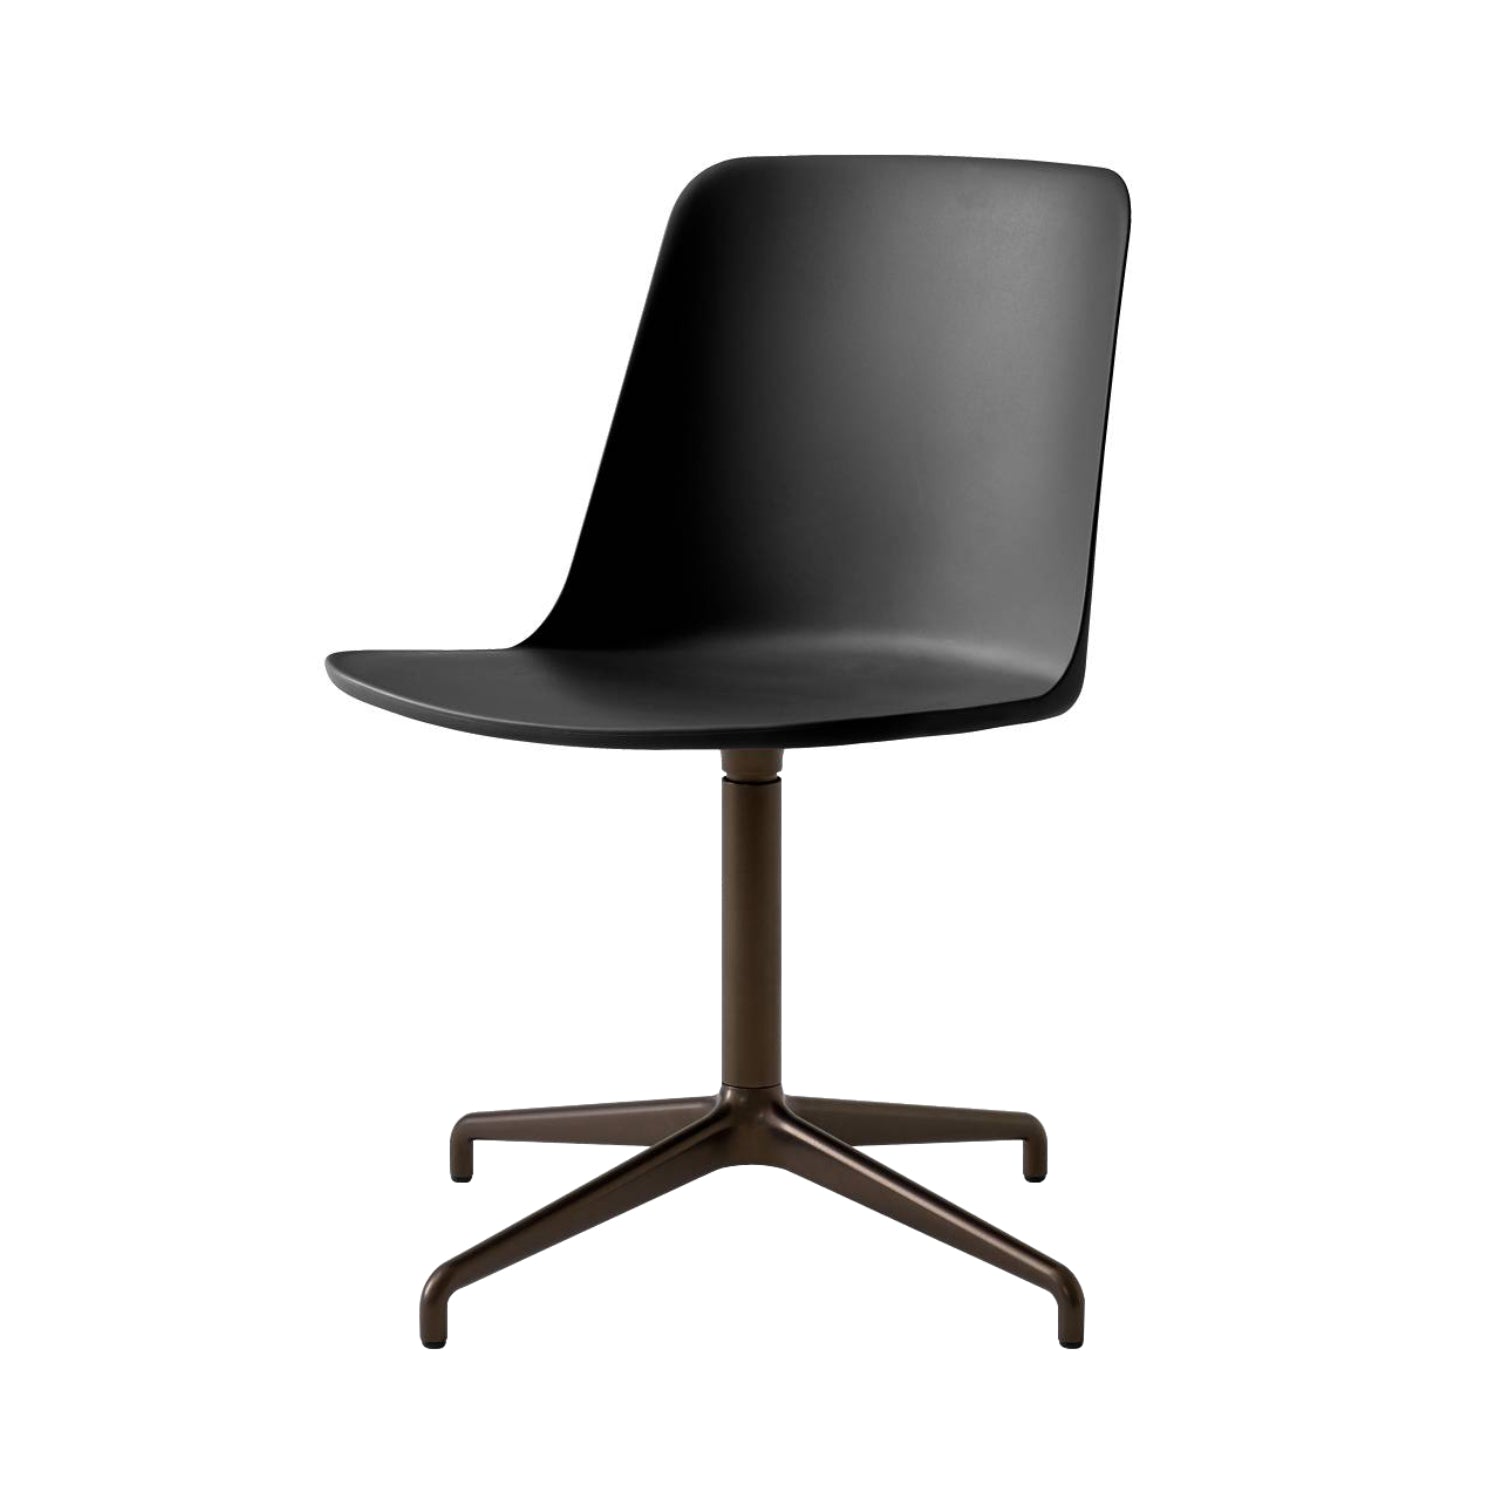 Rely Chair HW16: Black + Bronzed